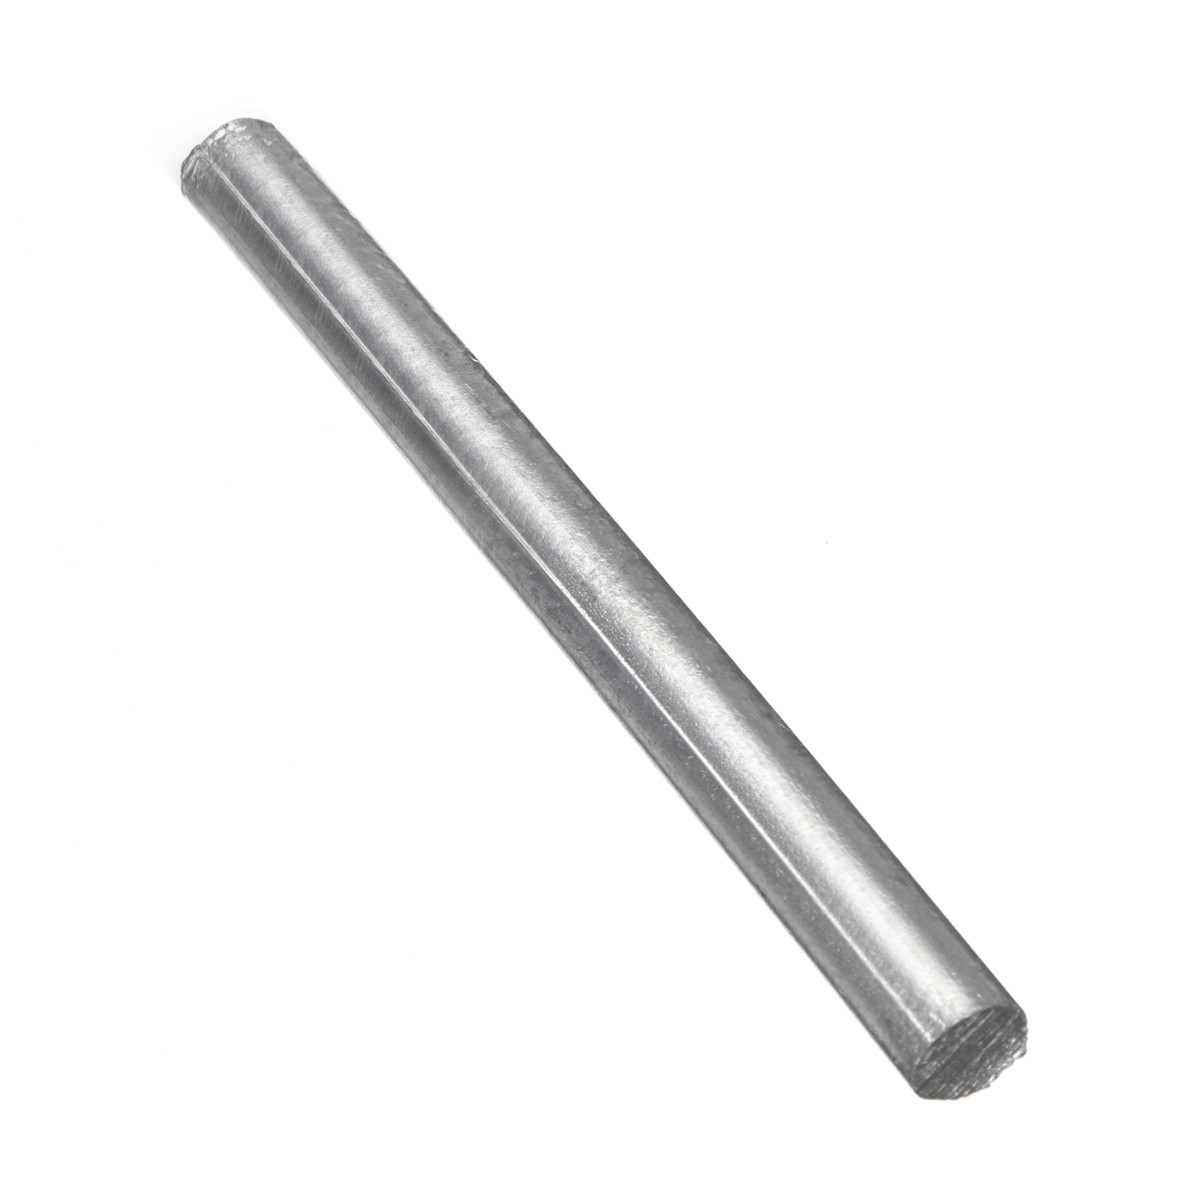 JF-XUAN 0.4 inch x 4 inch High Purity Zn 99.95% Zinc Metal Rod Anode Solid Round Bar Electrical Tools Welding Rods 